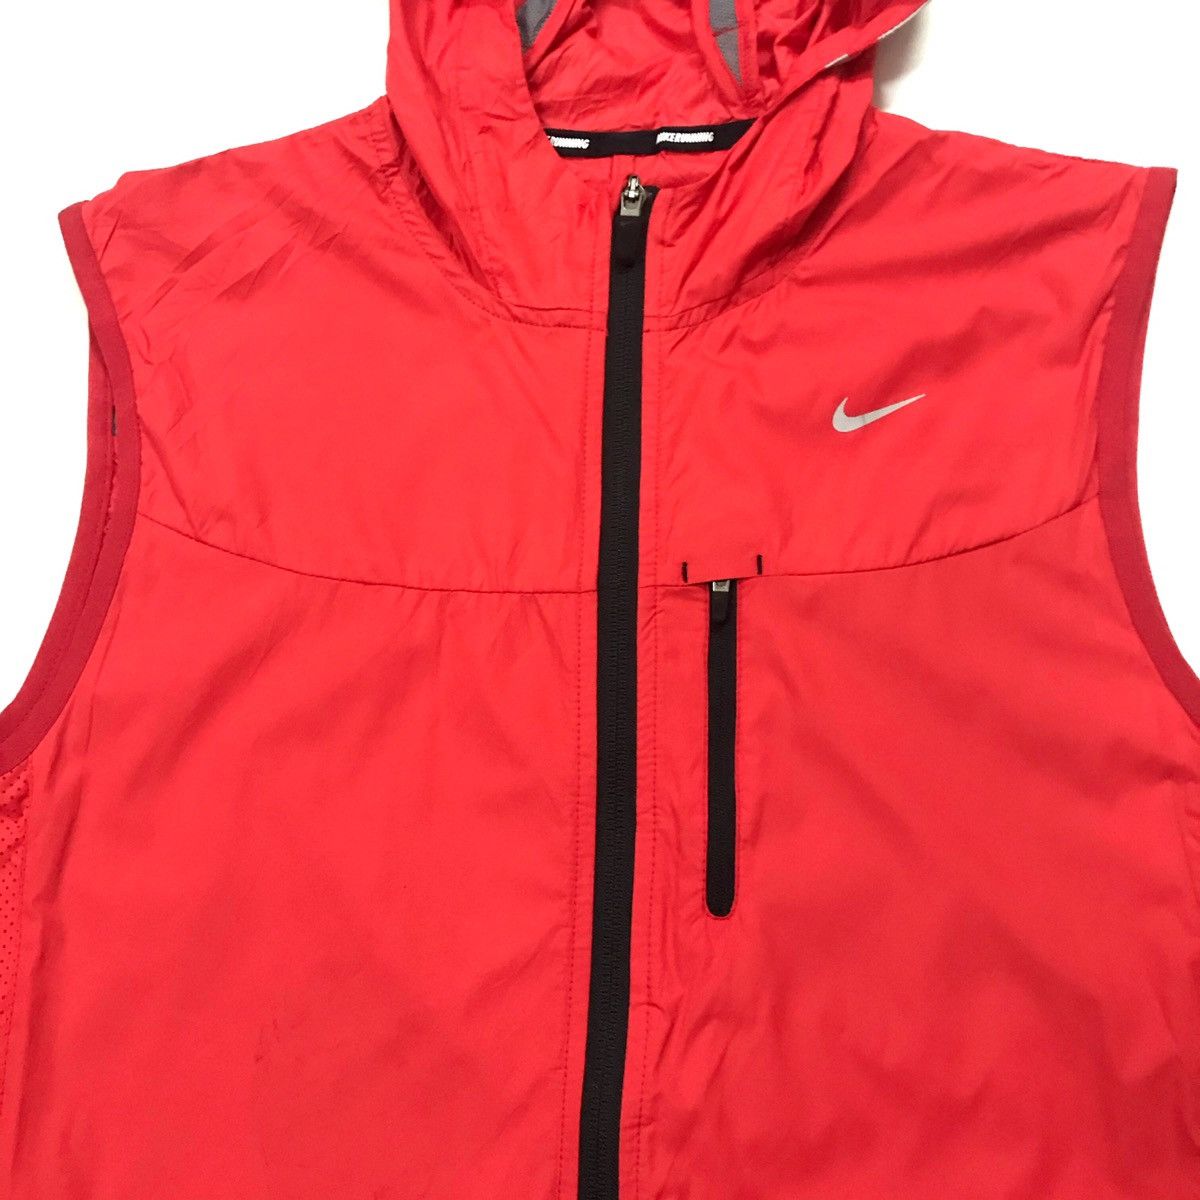 Nike Nike running vest hoodie Size US M / EU 48-50 / 2 - 2 Preview